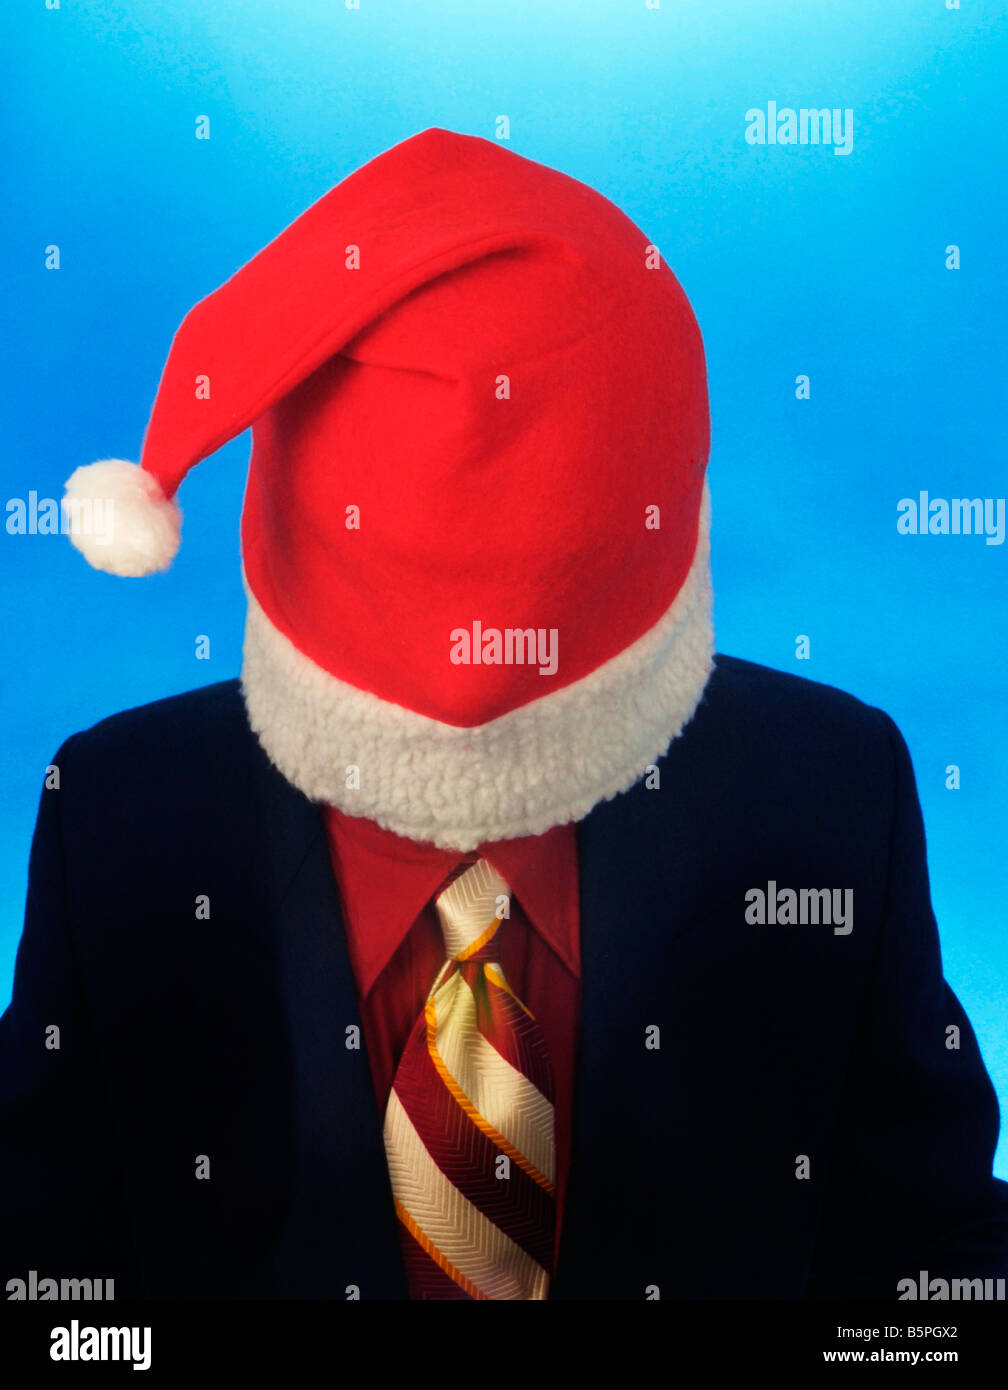 man wearing red white Santa Claus jelly bag cap hat on blue background Stock Photo